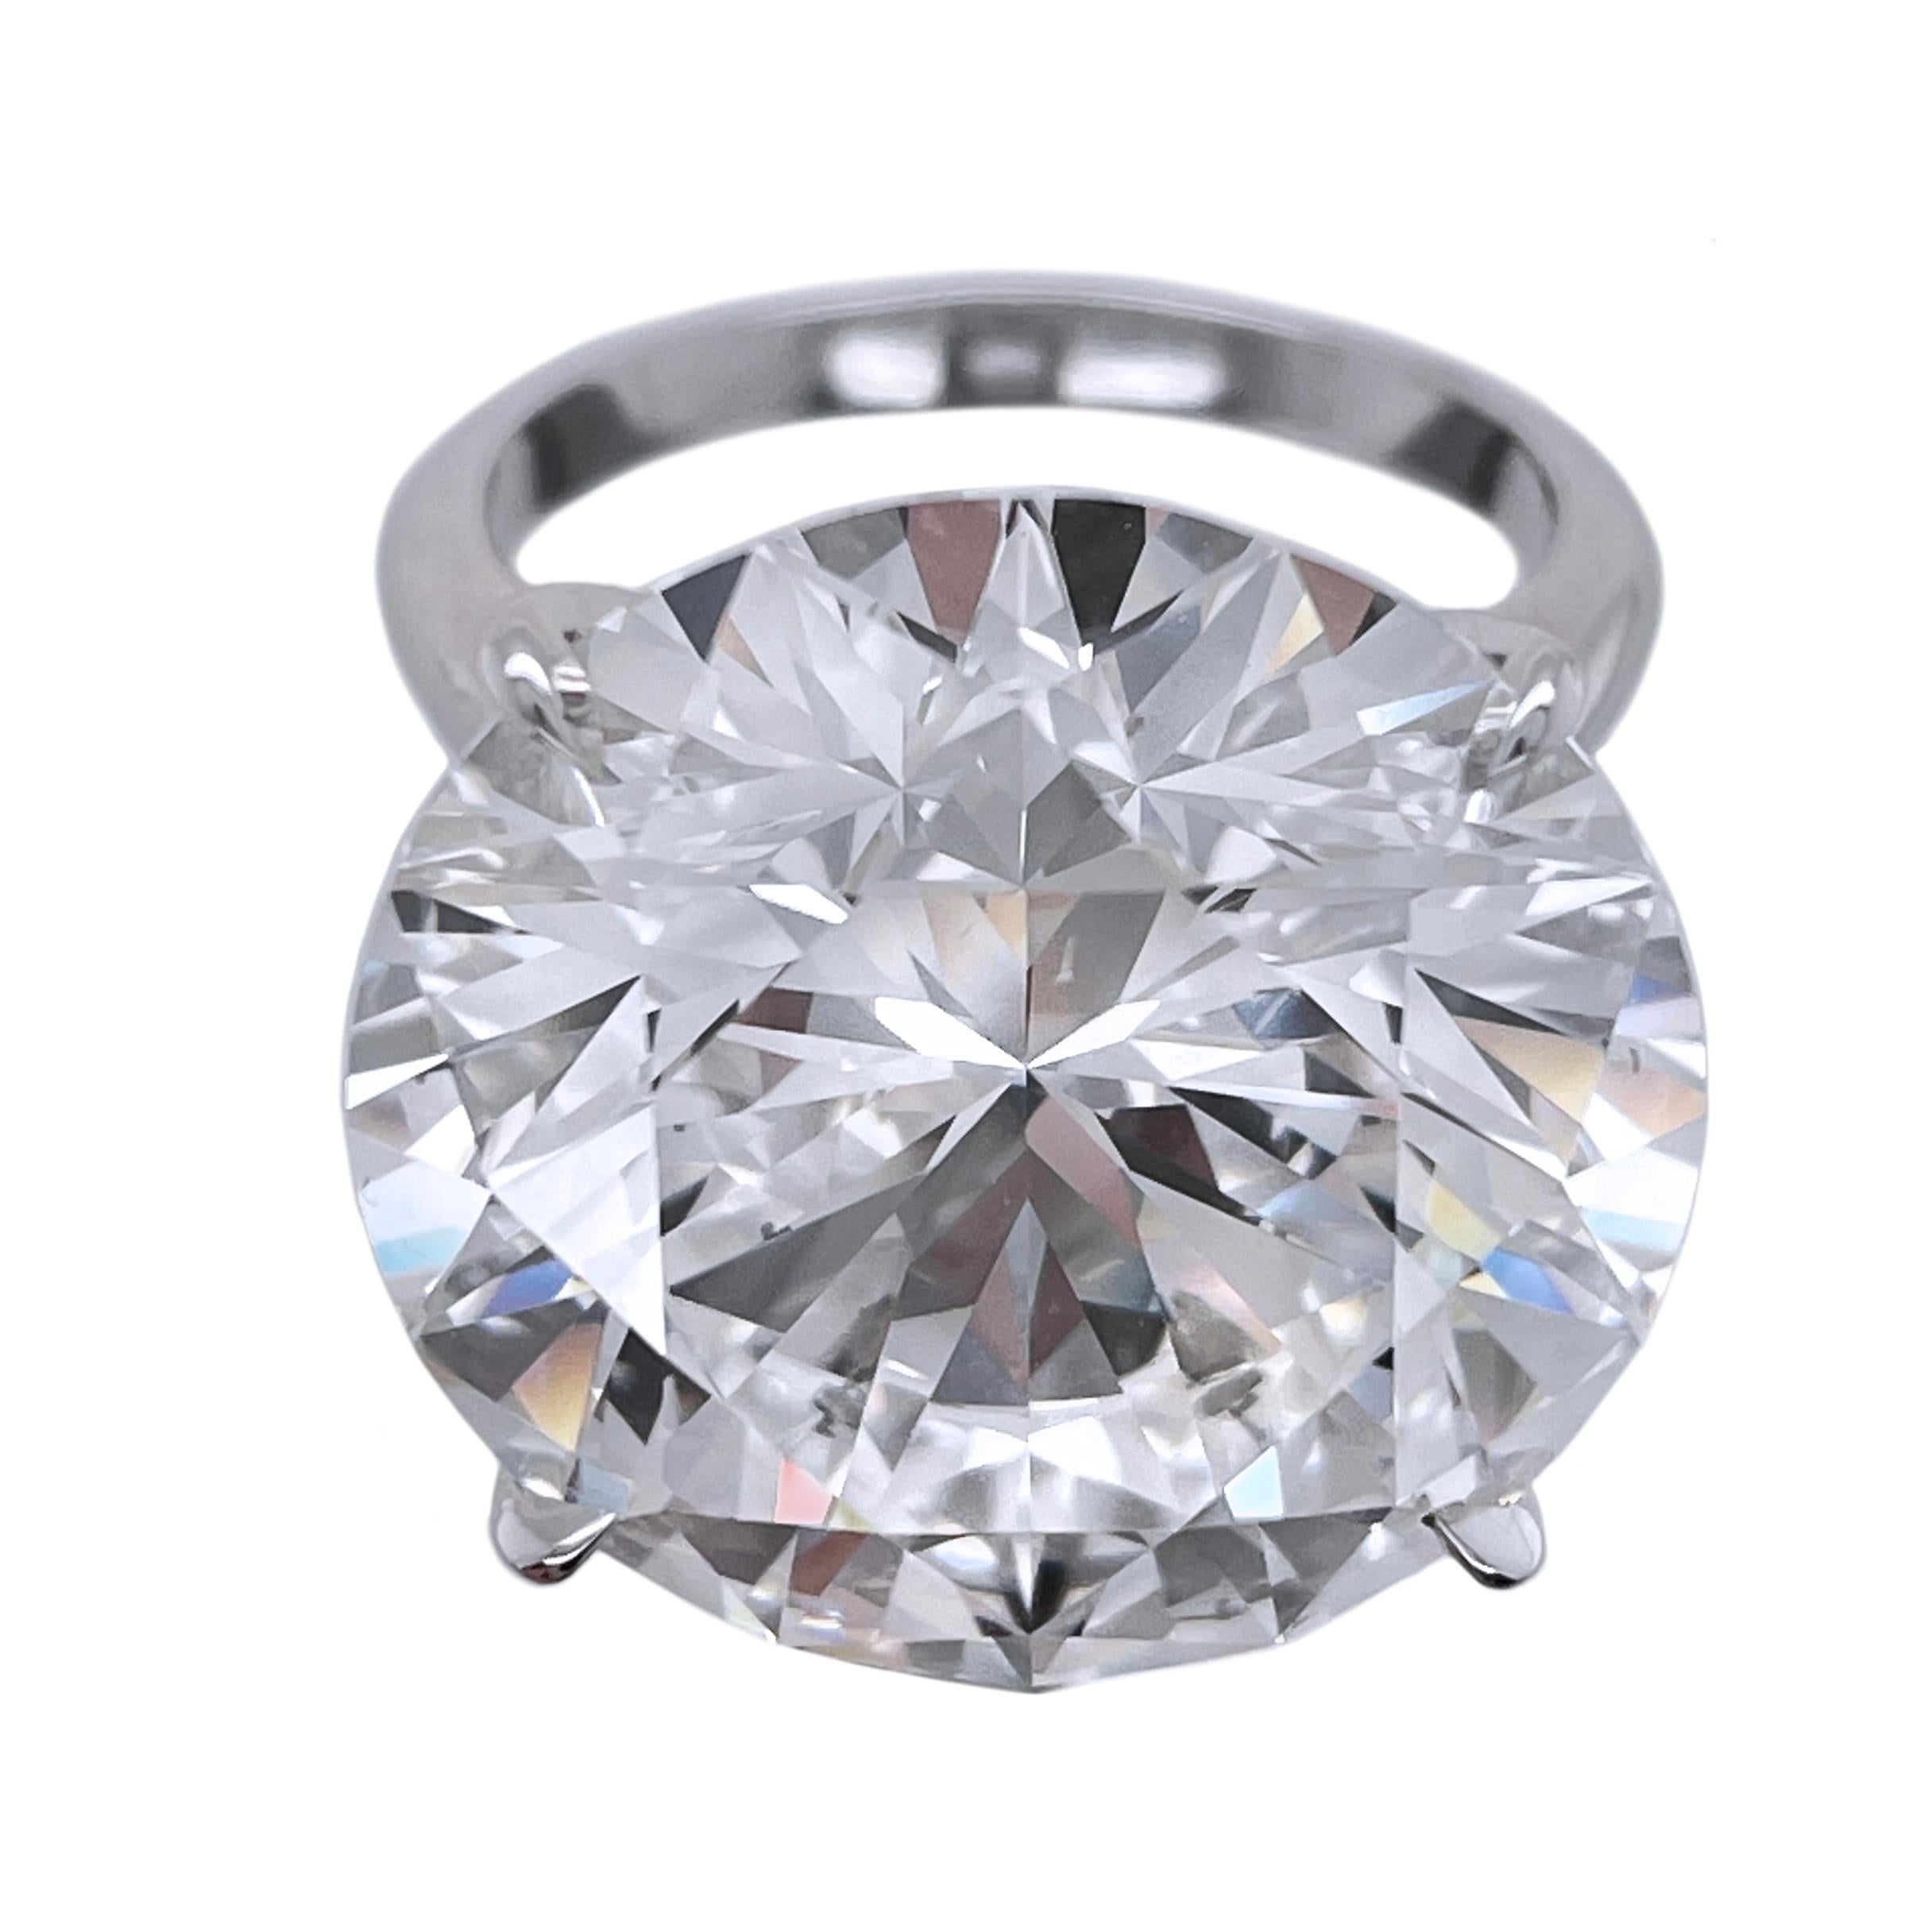 Round Cut 21.05 Carat Round Brilliant Cut Diamond Ring, GIA Certified For Sale